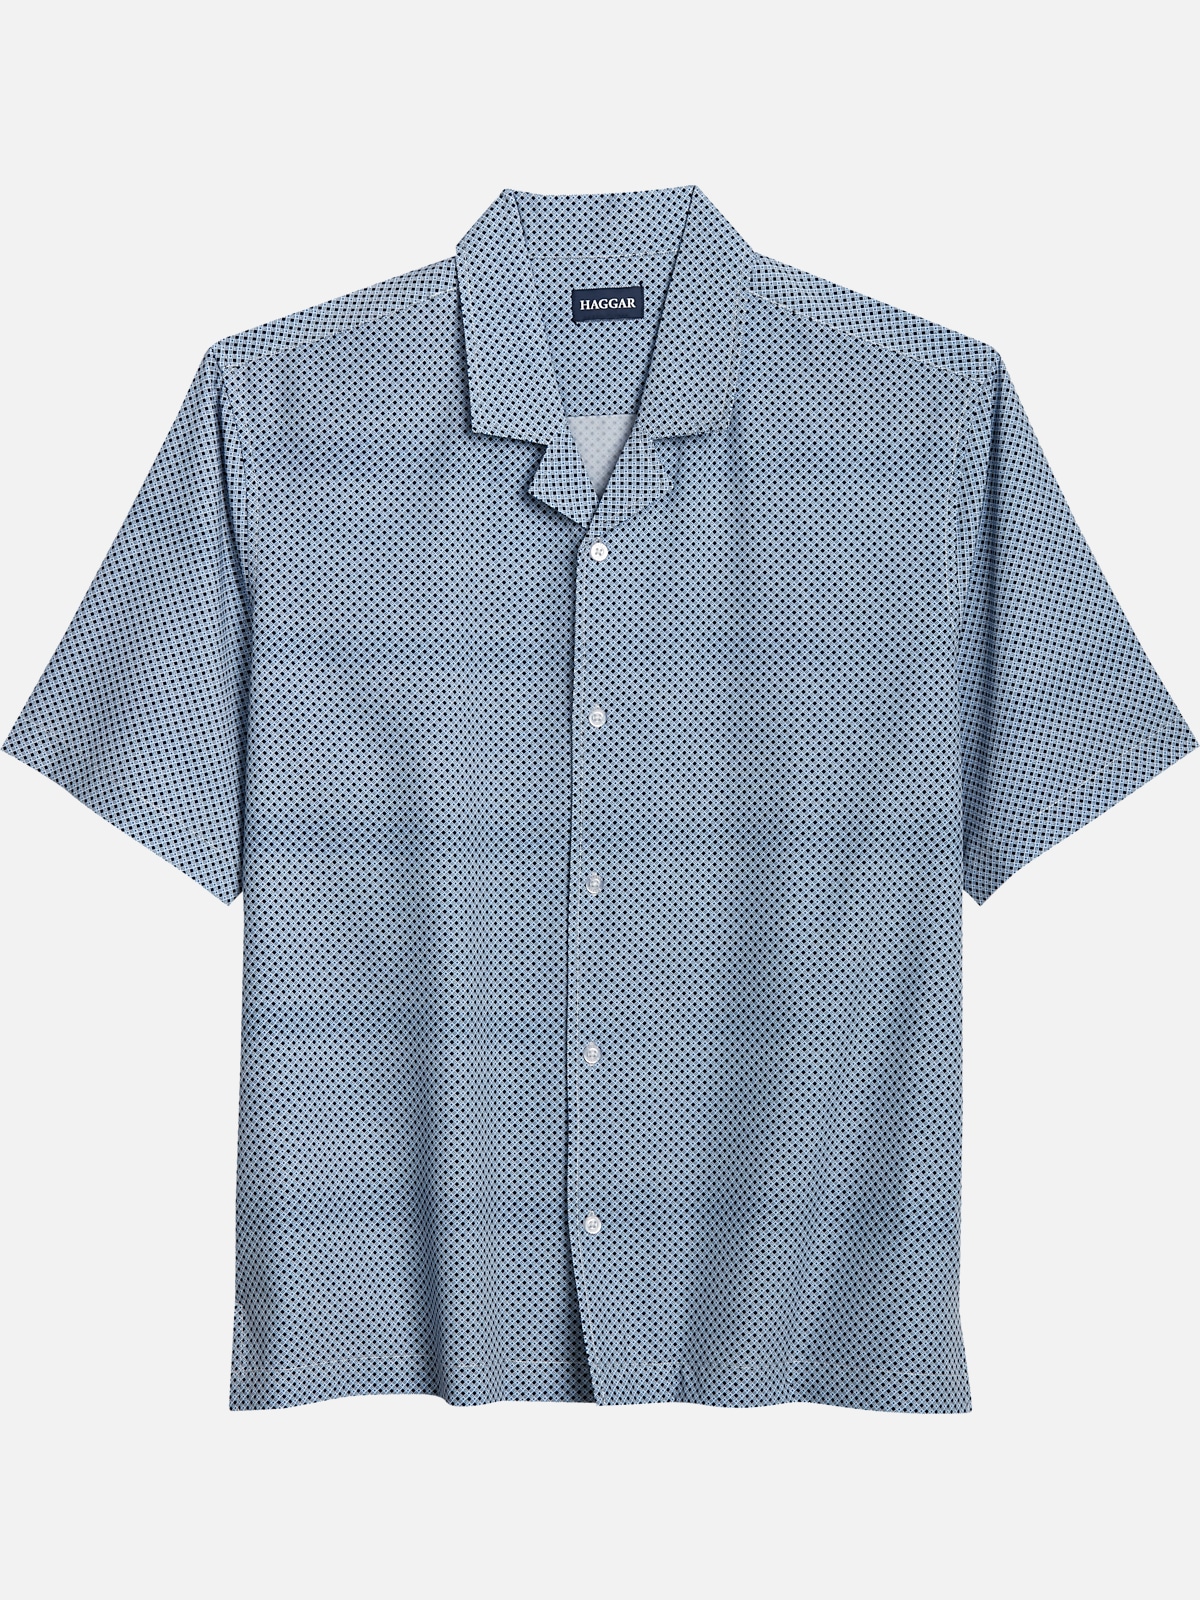 Haggar Modern Fit Camp Shirt | All Clearance $39.99| Men's Wearhouse